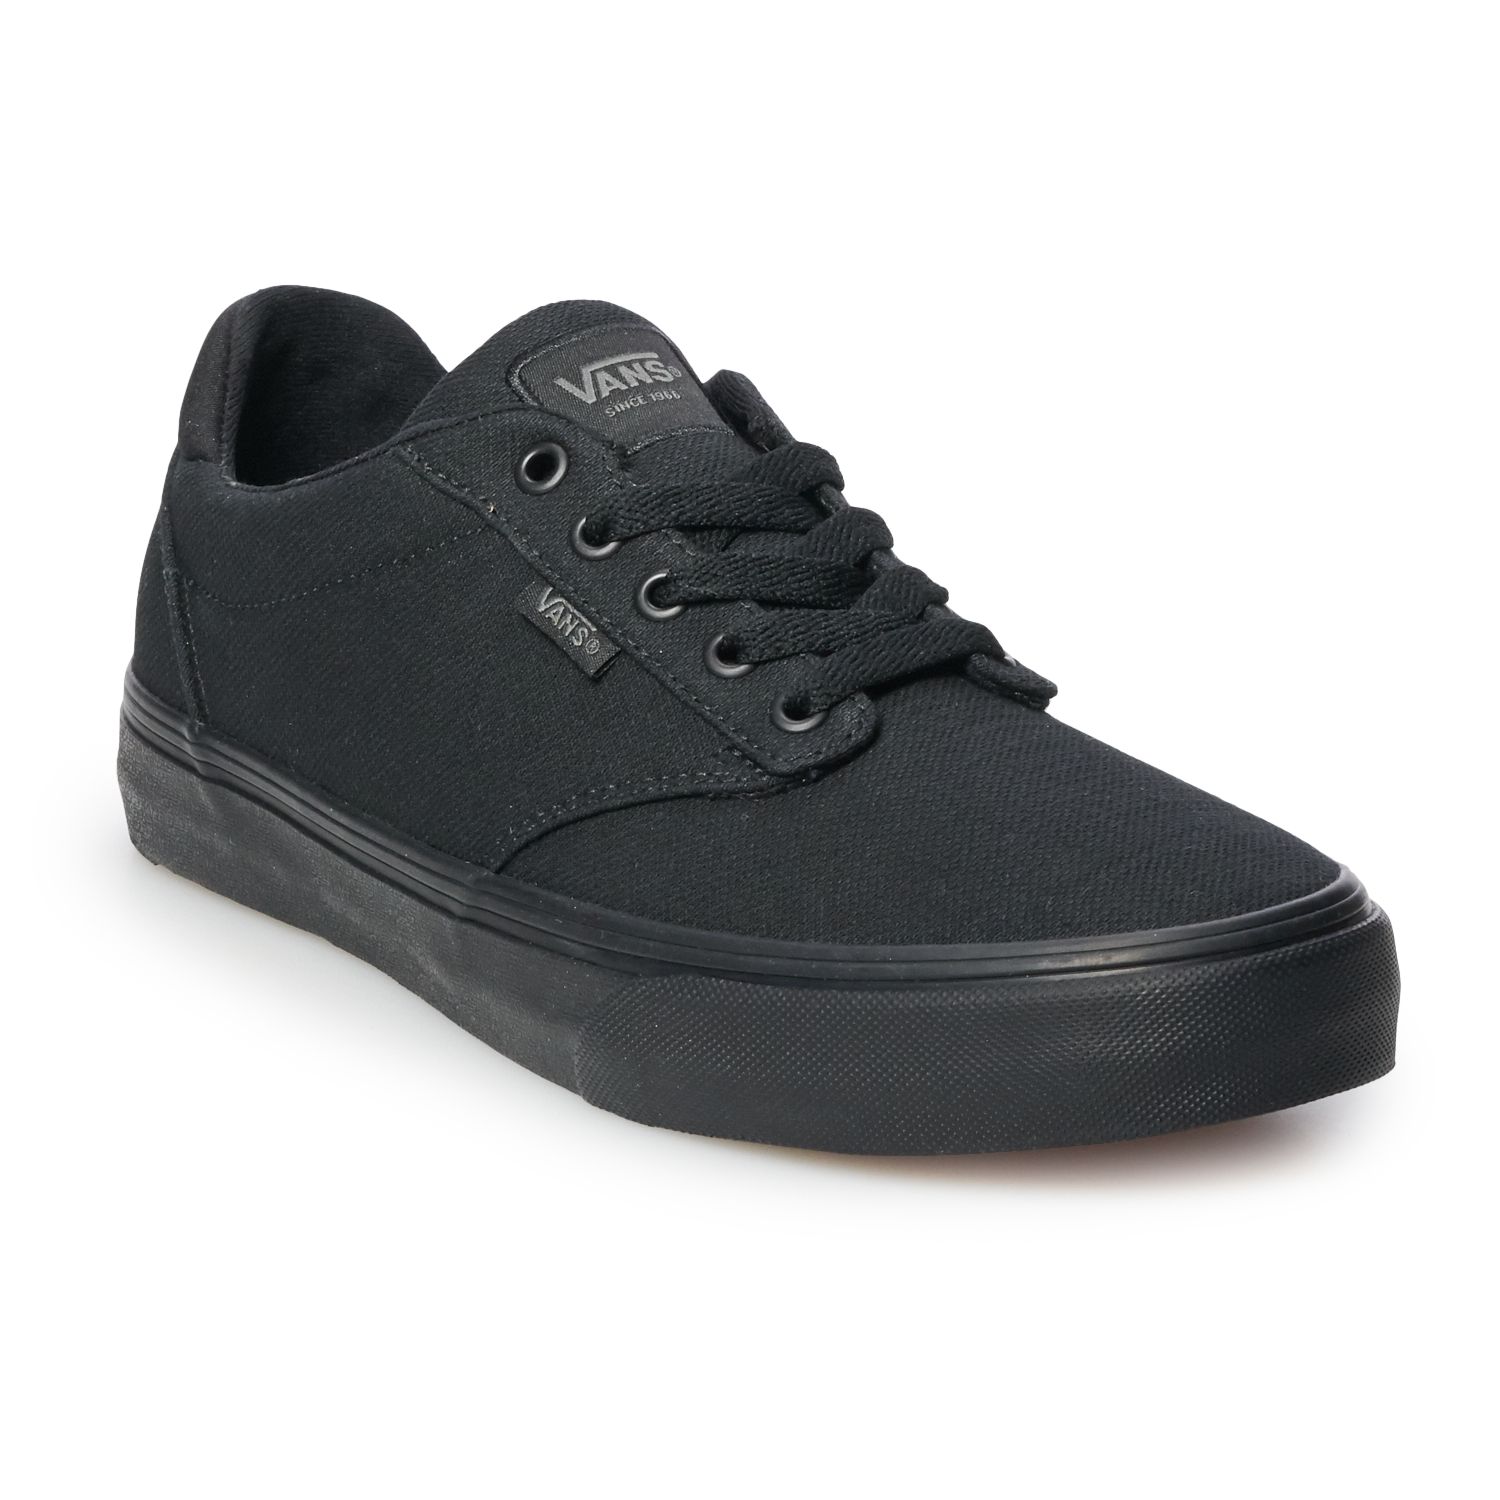 vans atwood donna